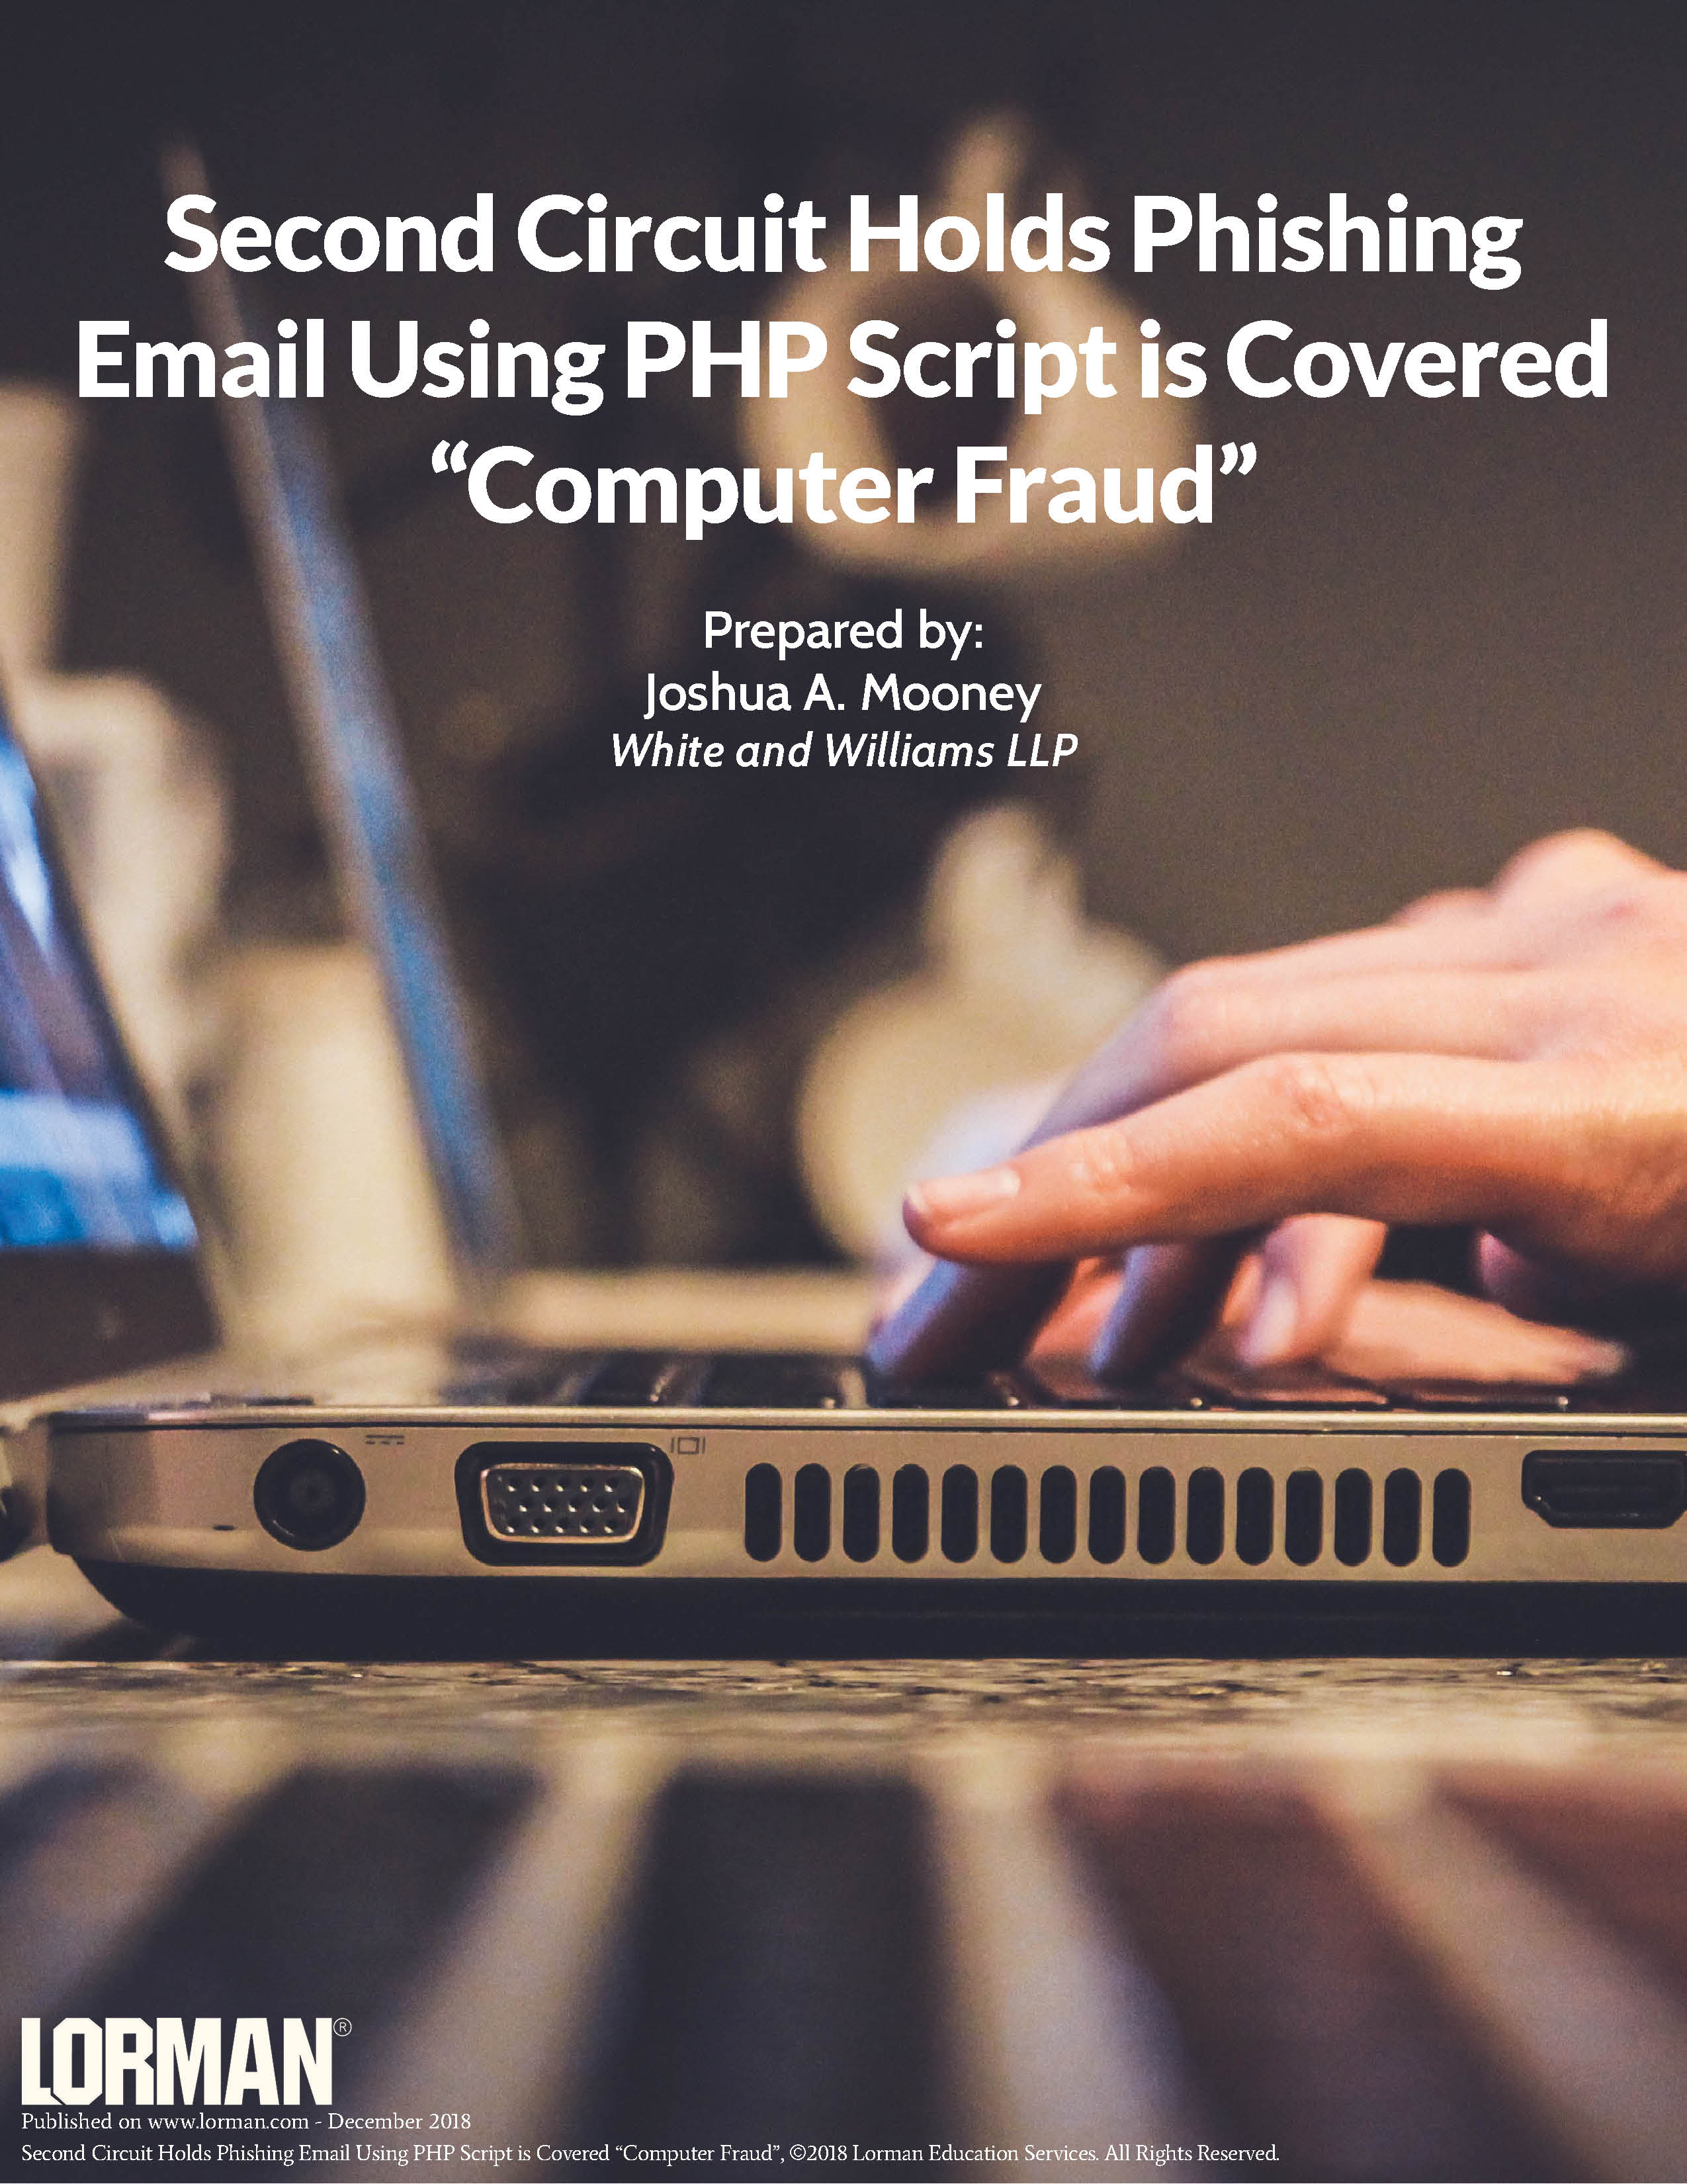 Second Circuit Holds Phishing Email Using PHP Script is Covered “Computer Fraud”